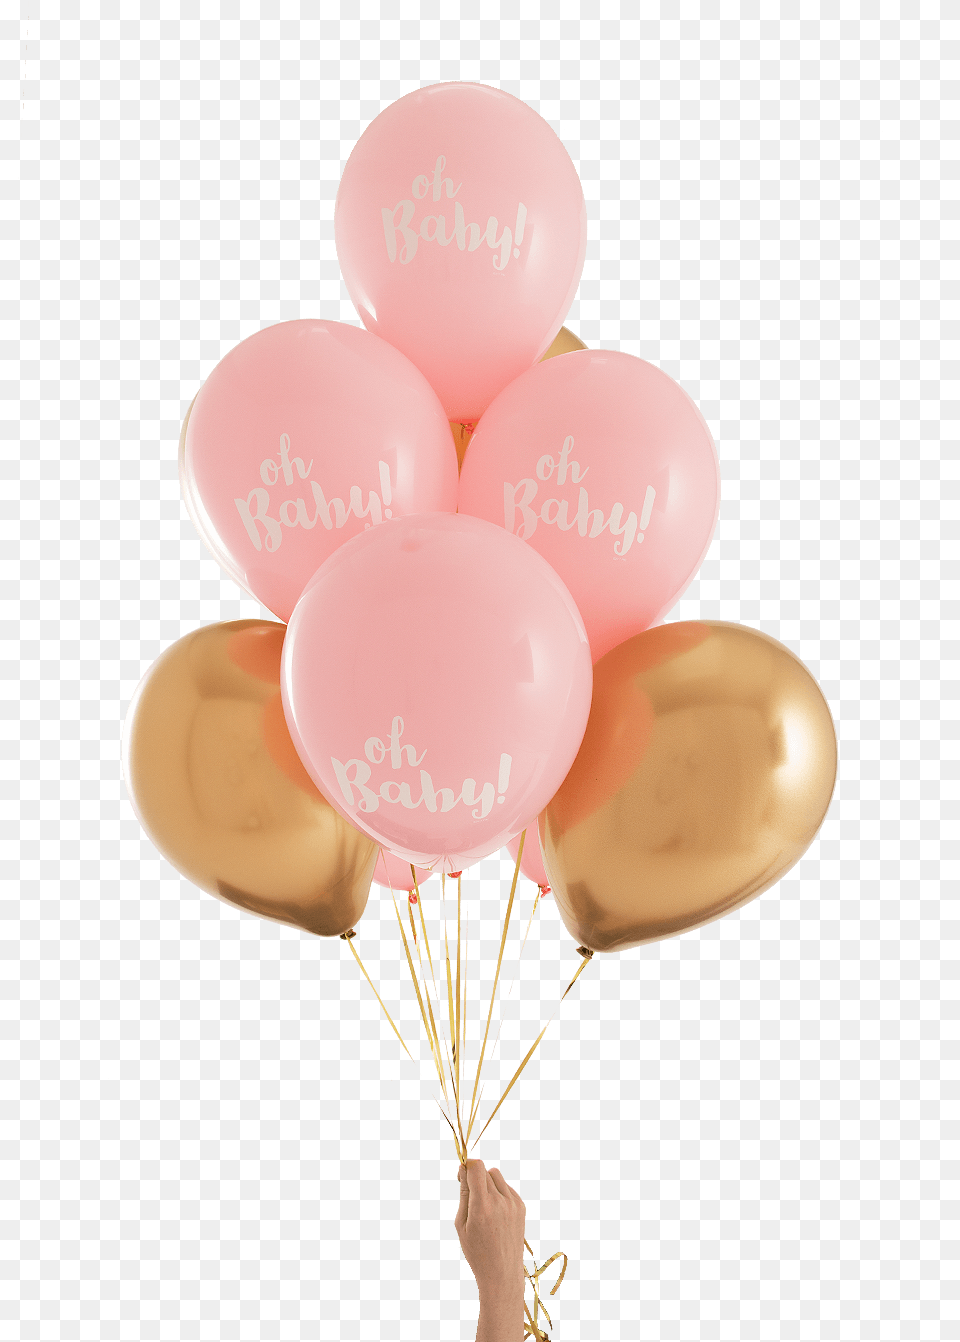 Oh Baby Pink U0026 Gold Party Balloons 14 Balloons Pink And Gold, Balloon Png